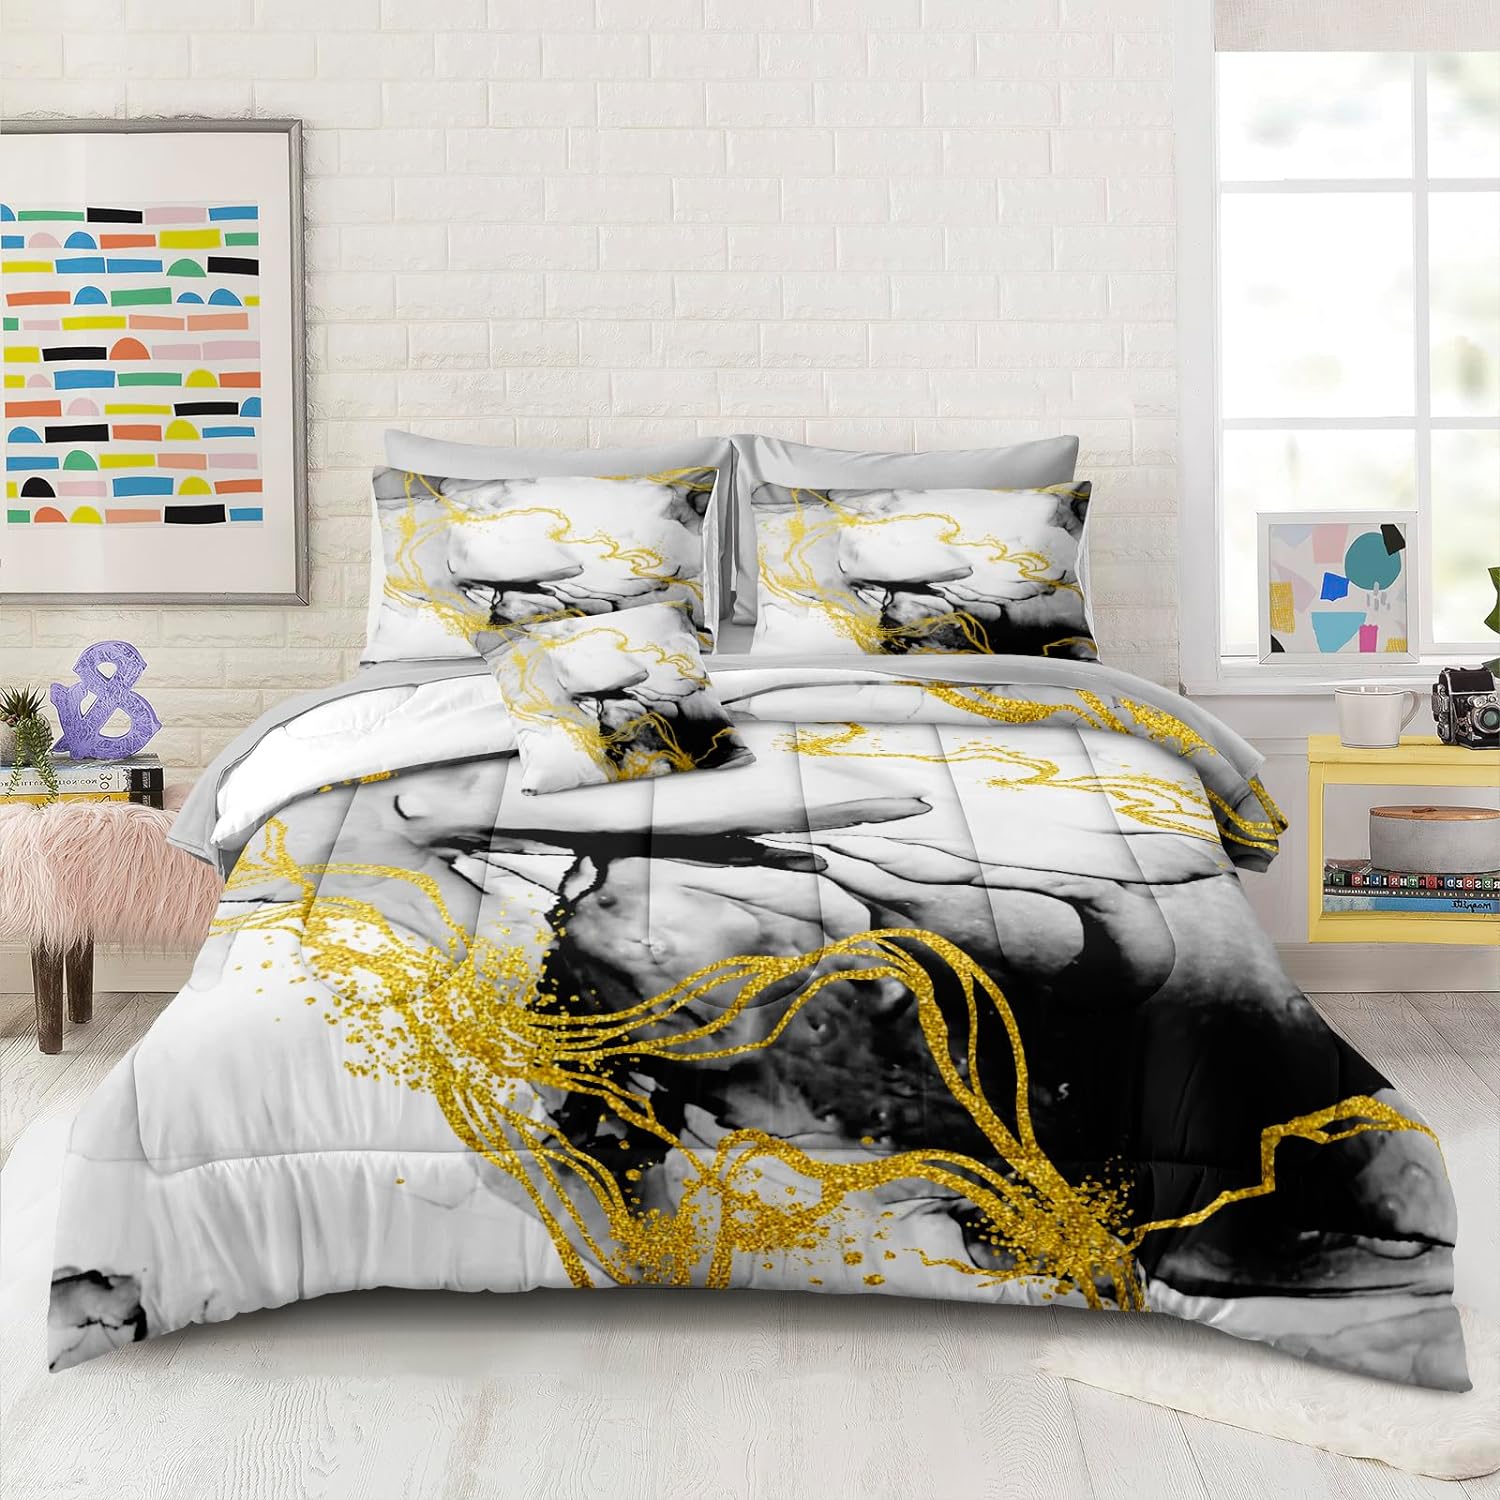 Bedbay Metallic Marble Comforter Set Queen Size Bed in a Bag 8 Pieces Black Gold Marble Printed Queen Bed Set 1 Comforter 4 Pillowcases 1 Flat Sheet 1 Fitted Sheet 1 Cushion Cover(Ink,Queen)